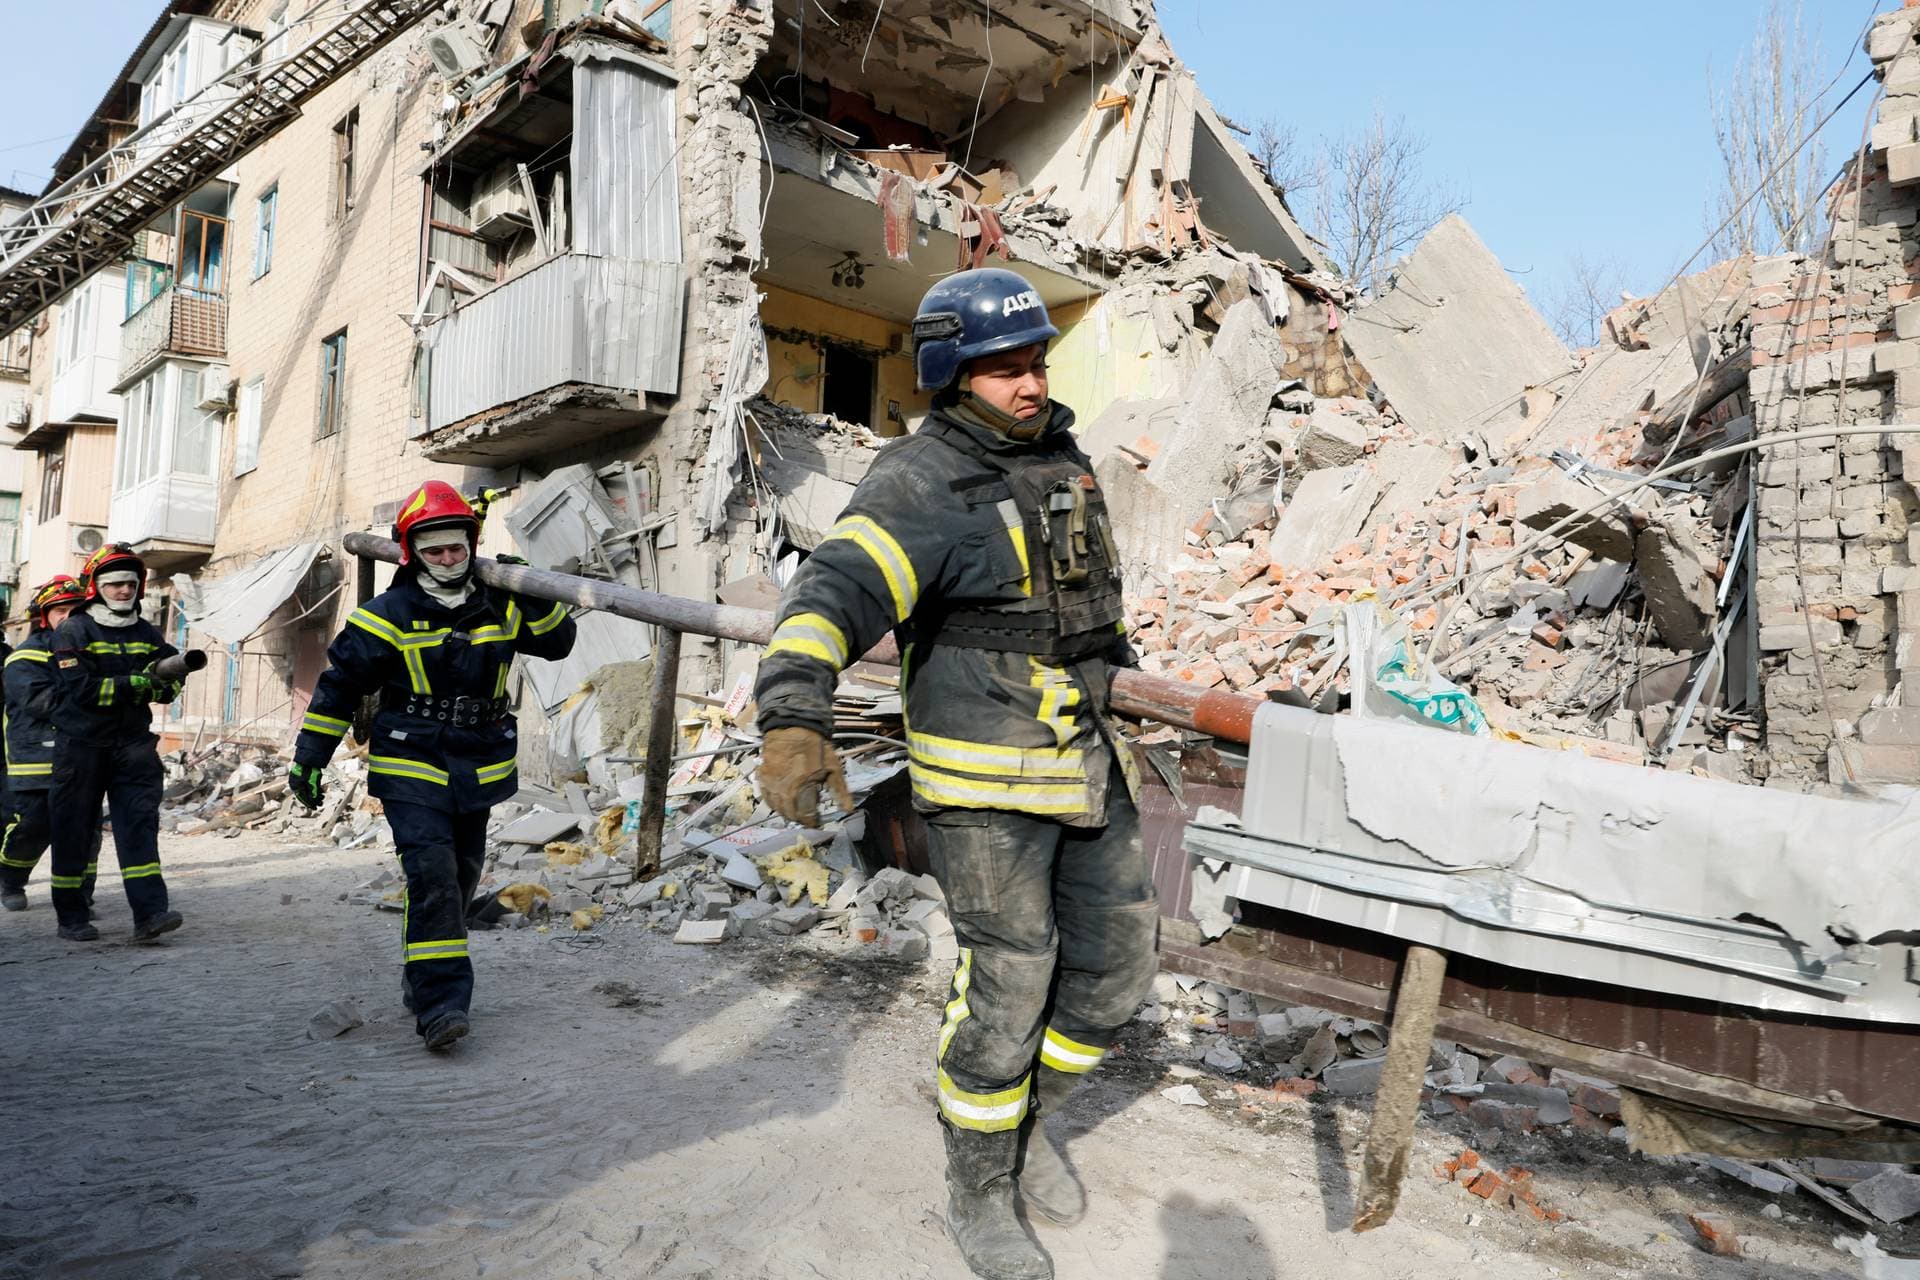 Rescuers work at the site of residential houses heavily damaged by a Russian missile strike in the town of Selydove